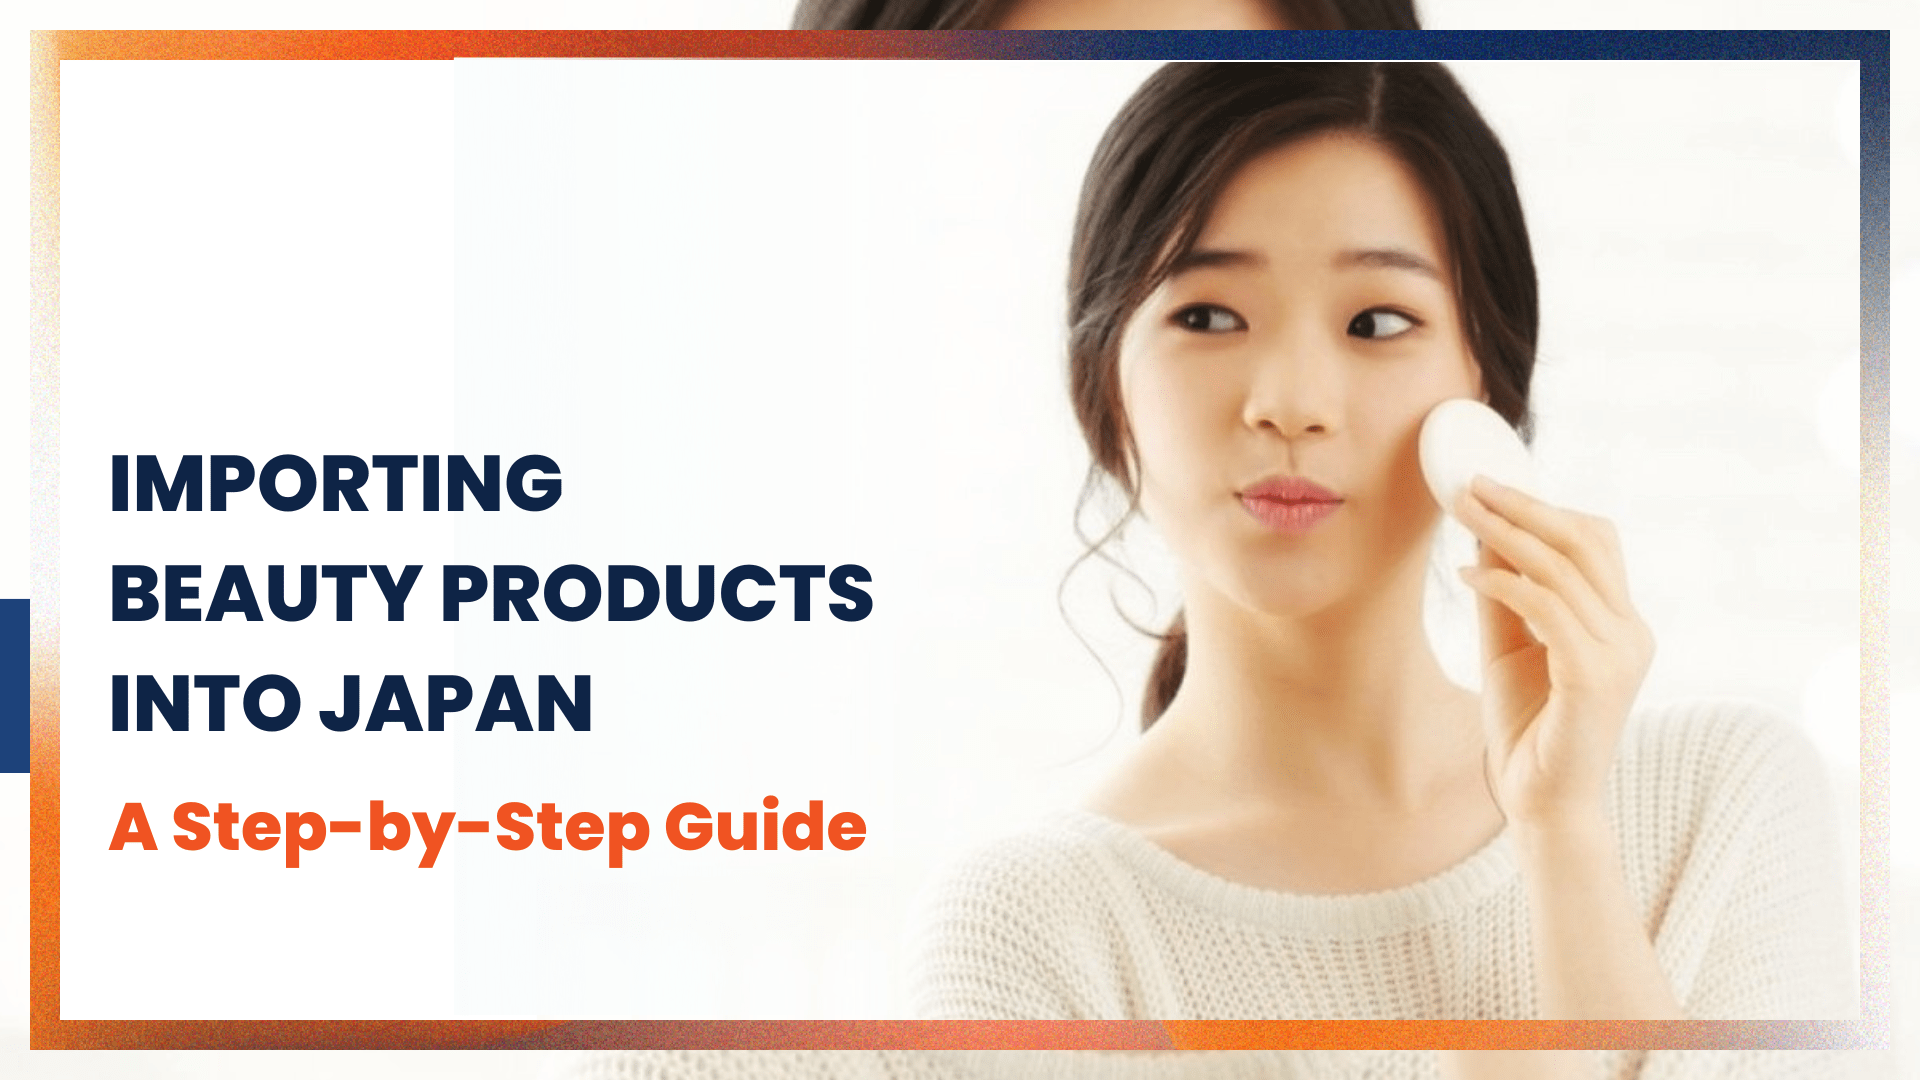 Importing Beauty Products into Japan